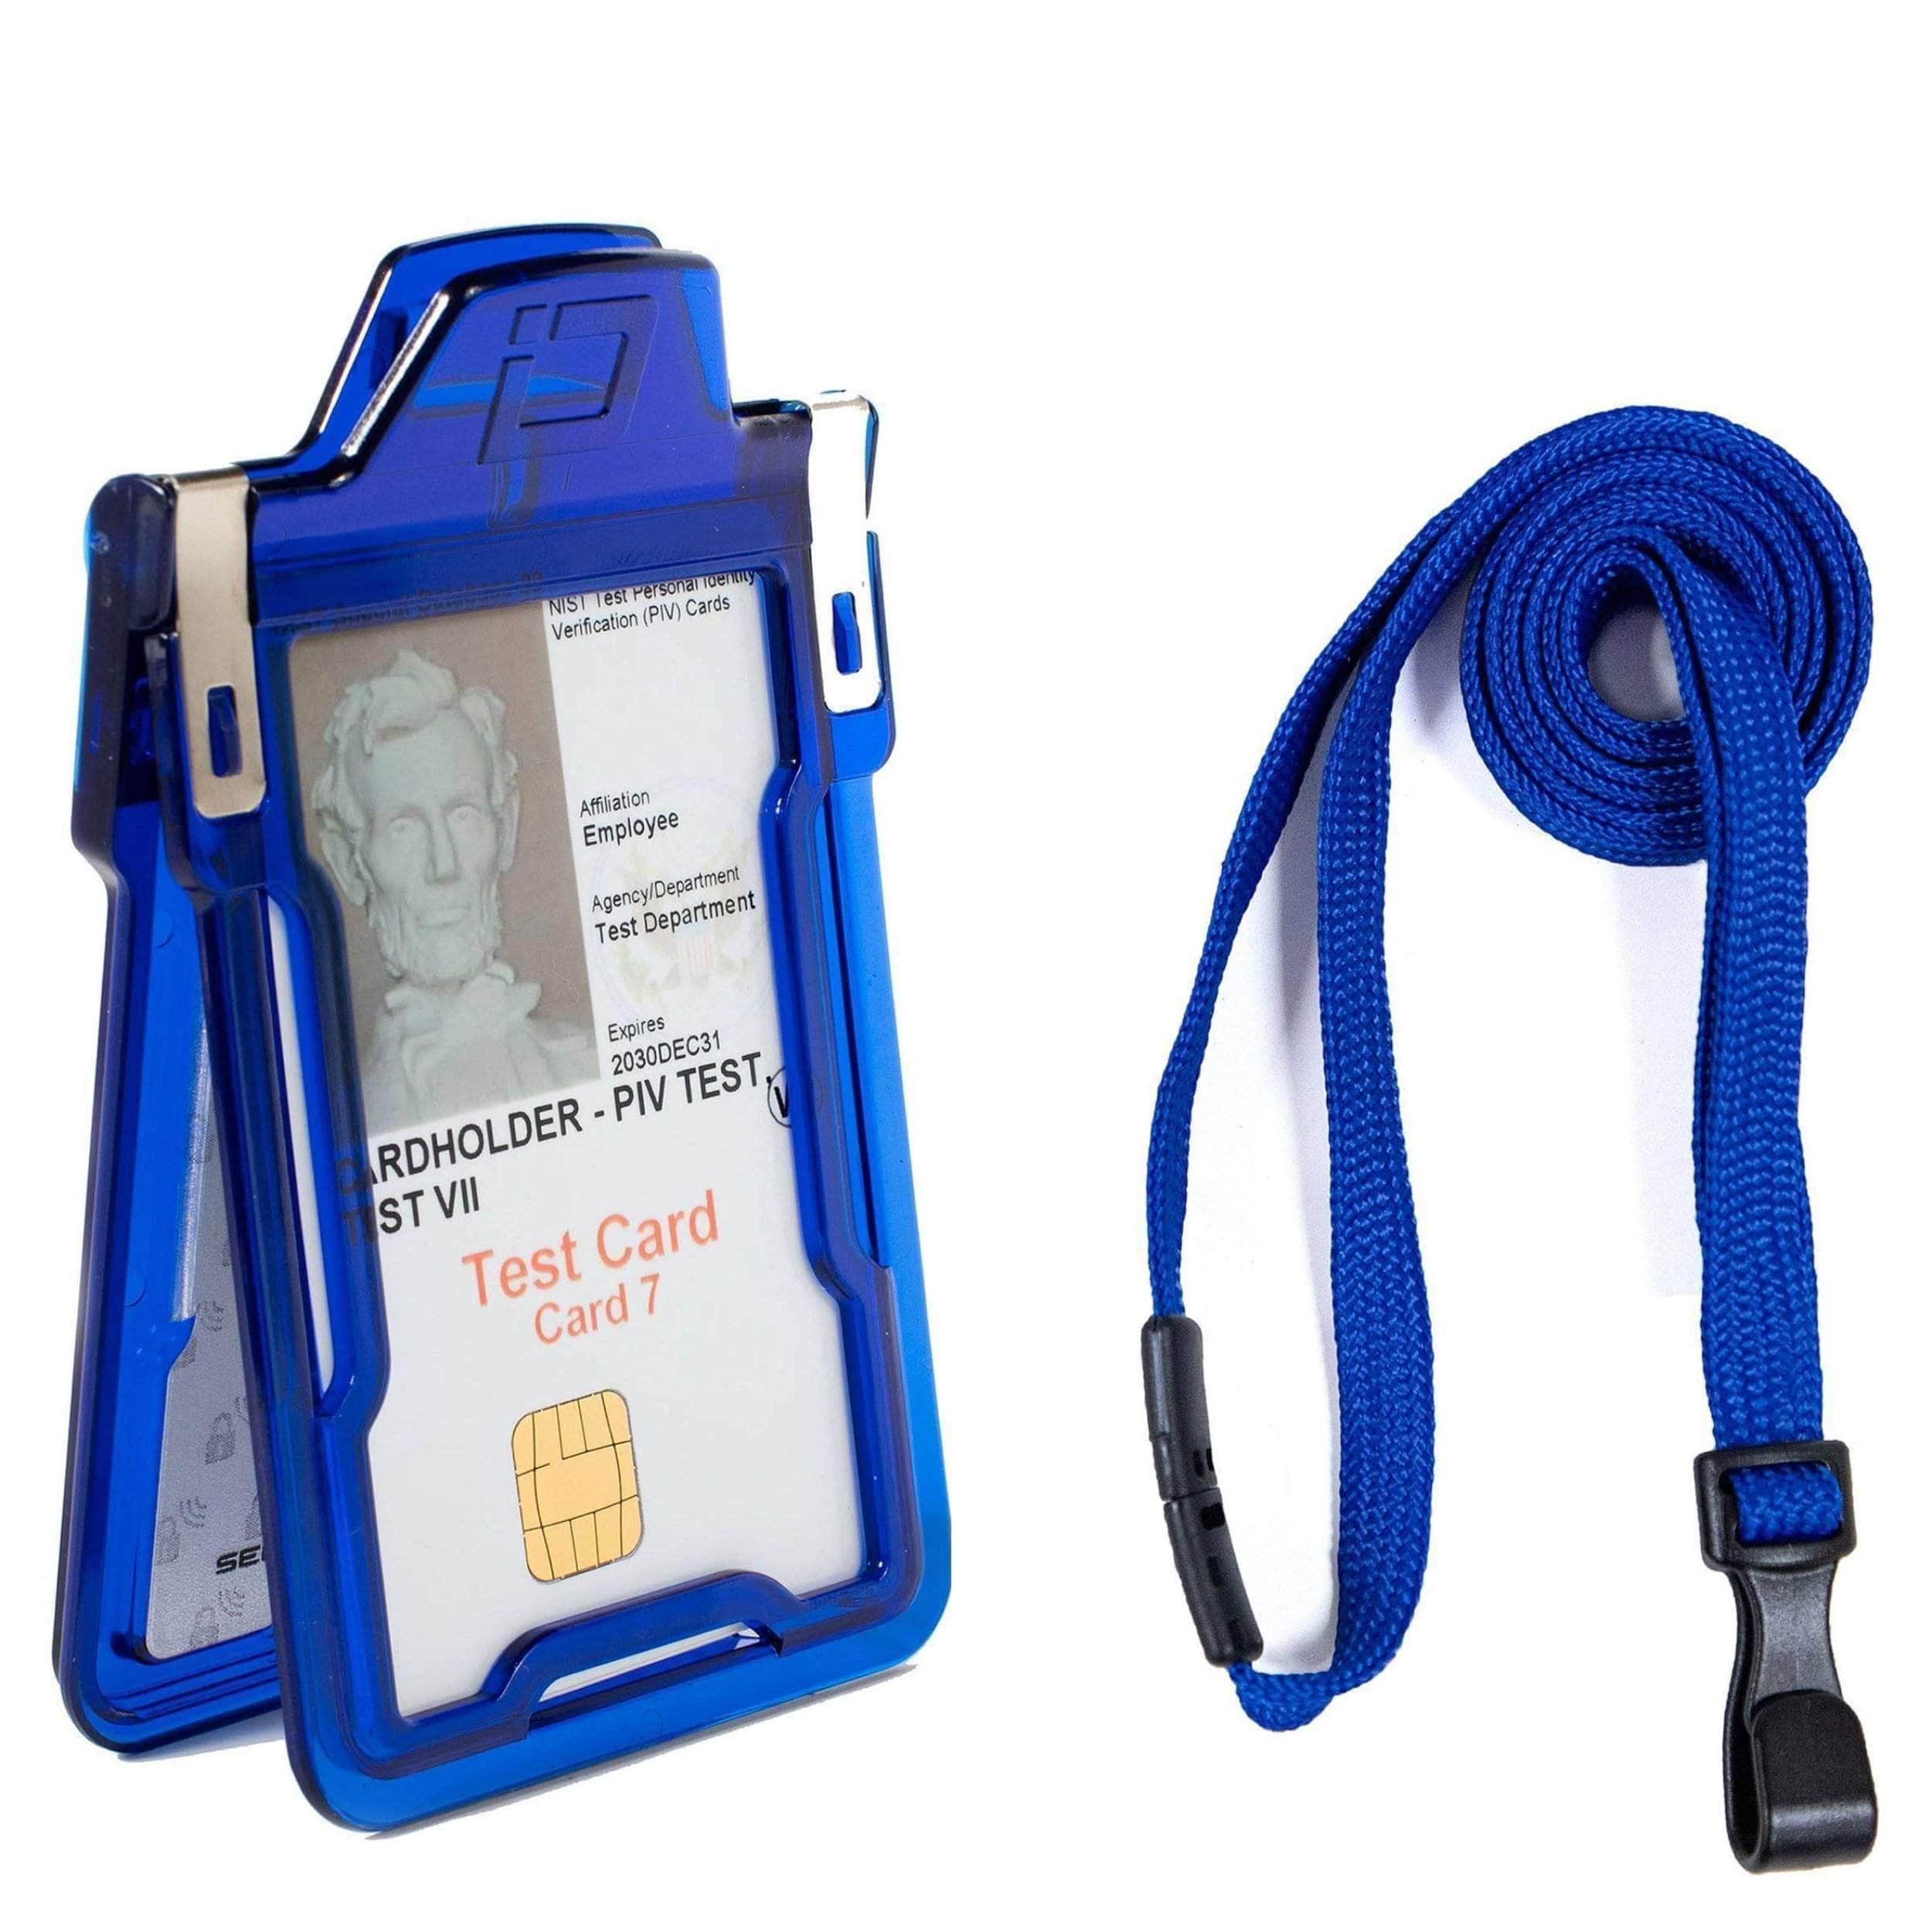 ID Stronghold Secure Badgeholder Classic and Lanyard Combo (Blue/Black)